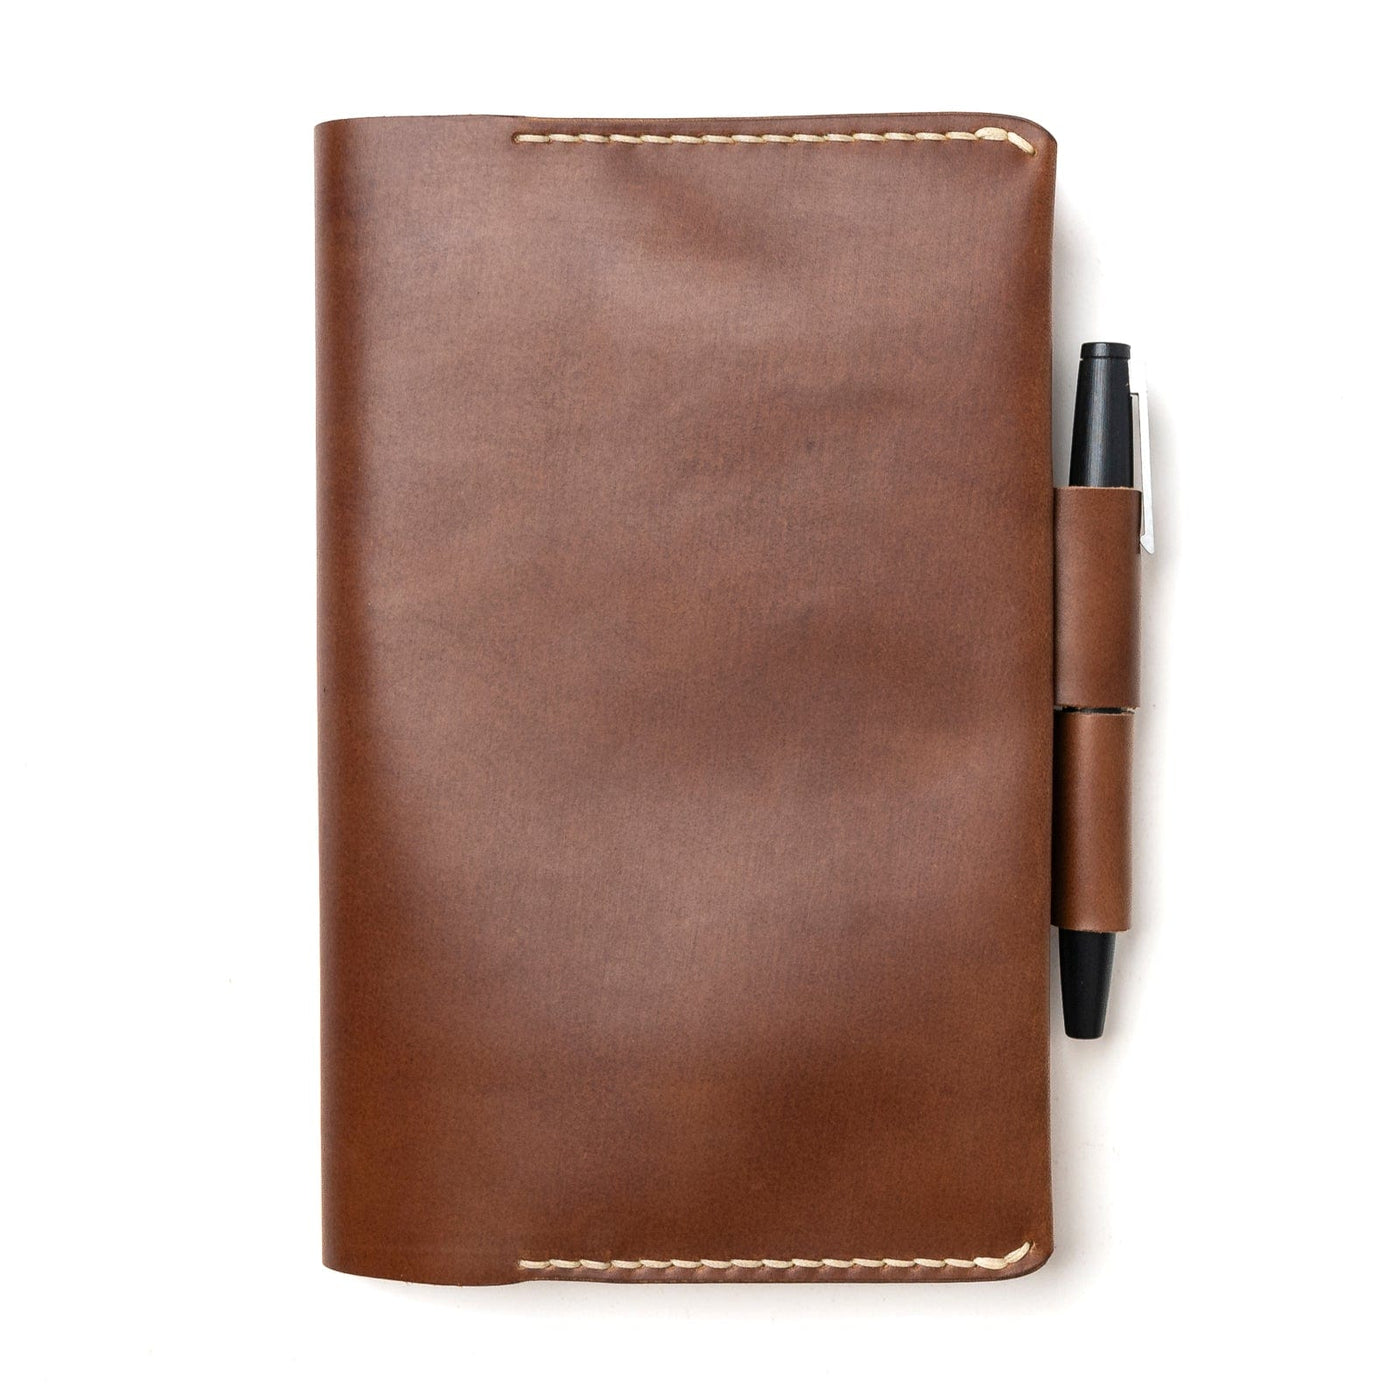 Leather Moleskine Large Notebook Cover - Natural Popov Leather